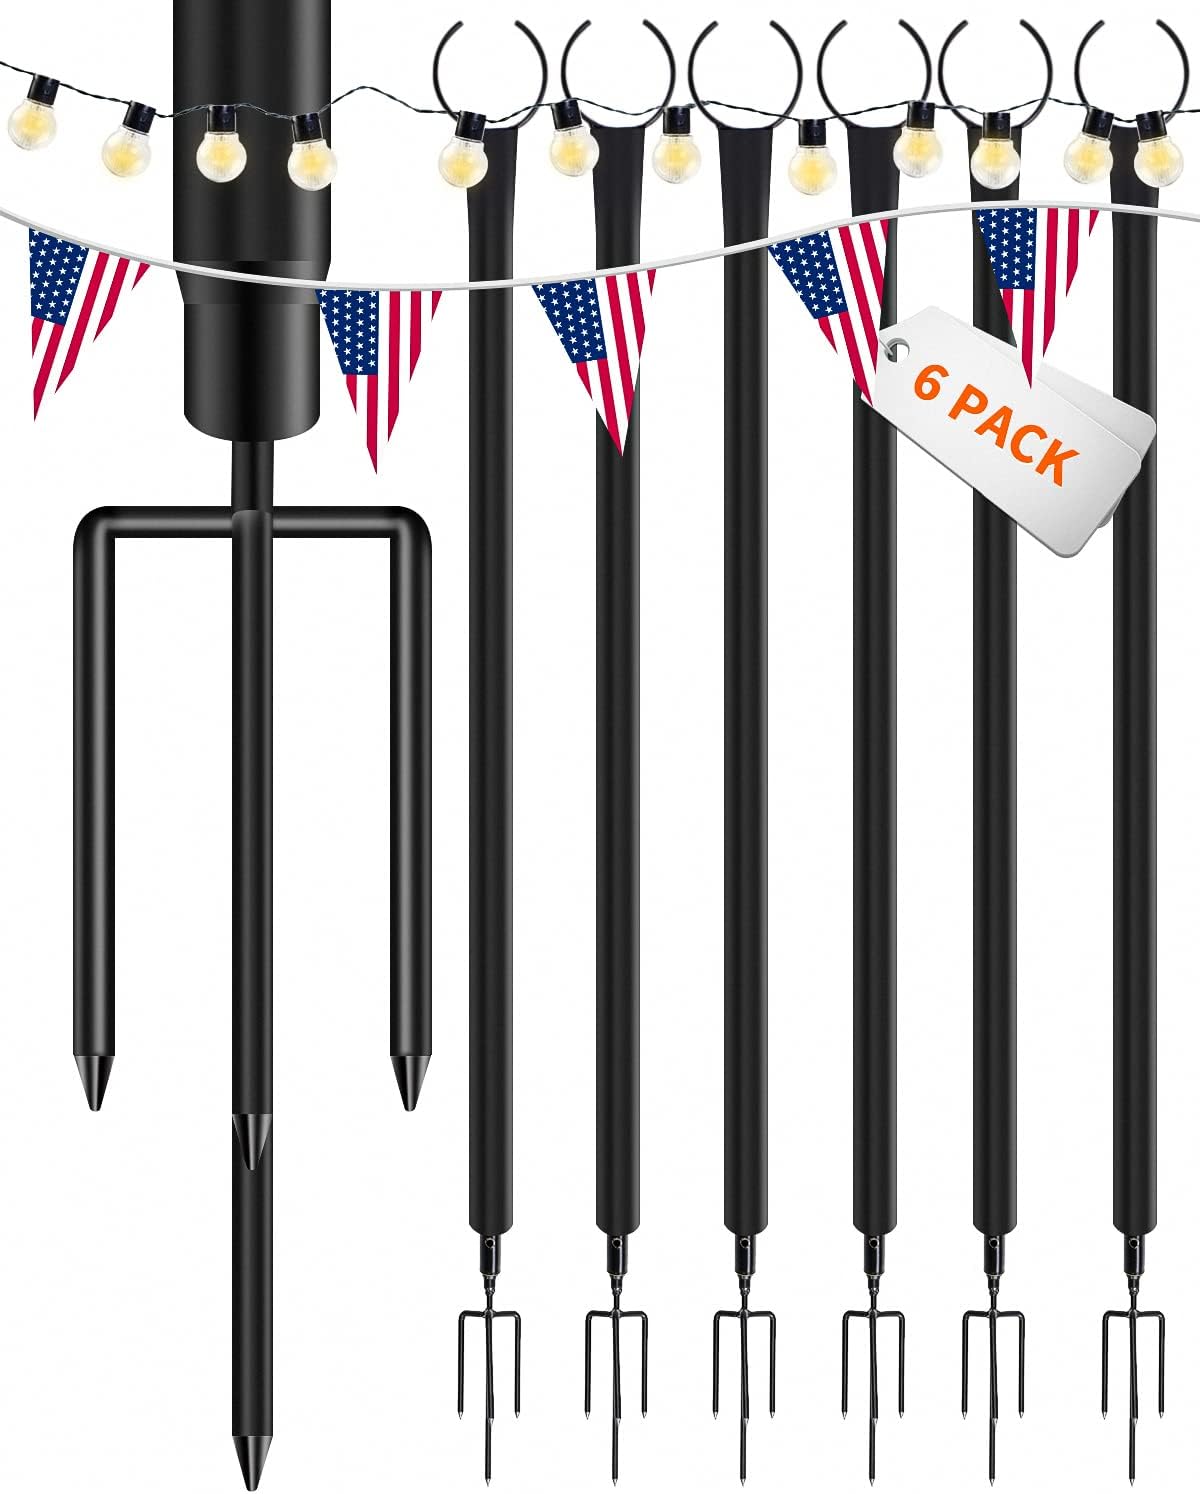 Sandinrayli Outdoor String Light Poles,6 Pack Metal Black Poles for Hanging Lights,9ft Patio Poles for String Lights in Your Yard,Create Ambiance with Durable Outdoor Pole Lights